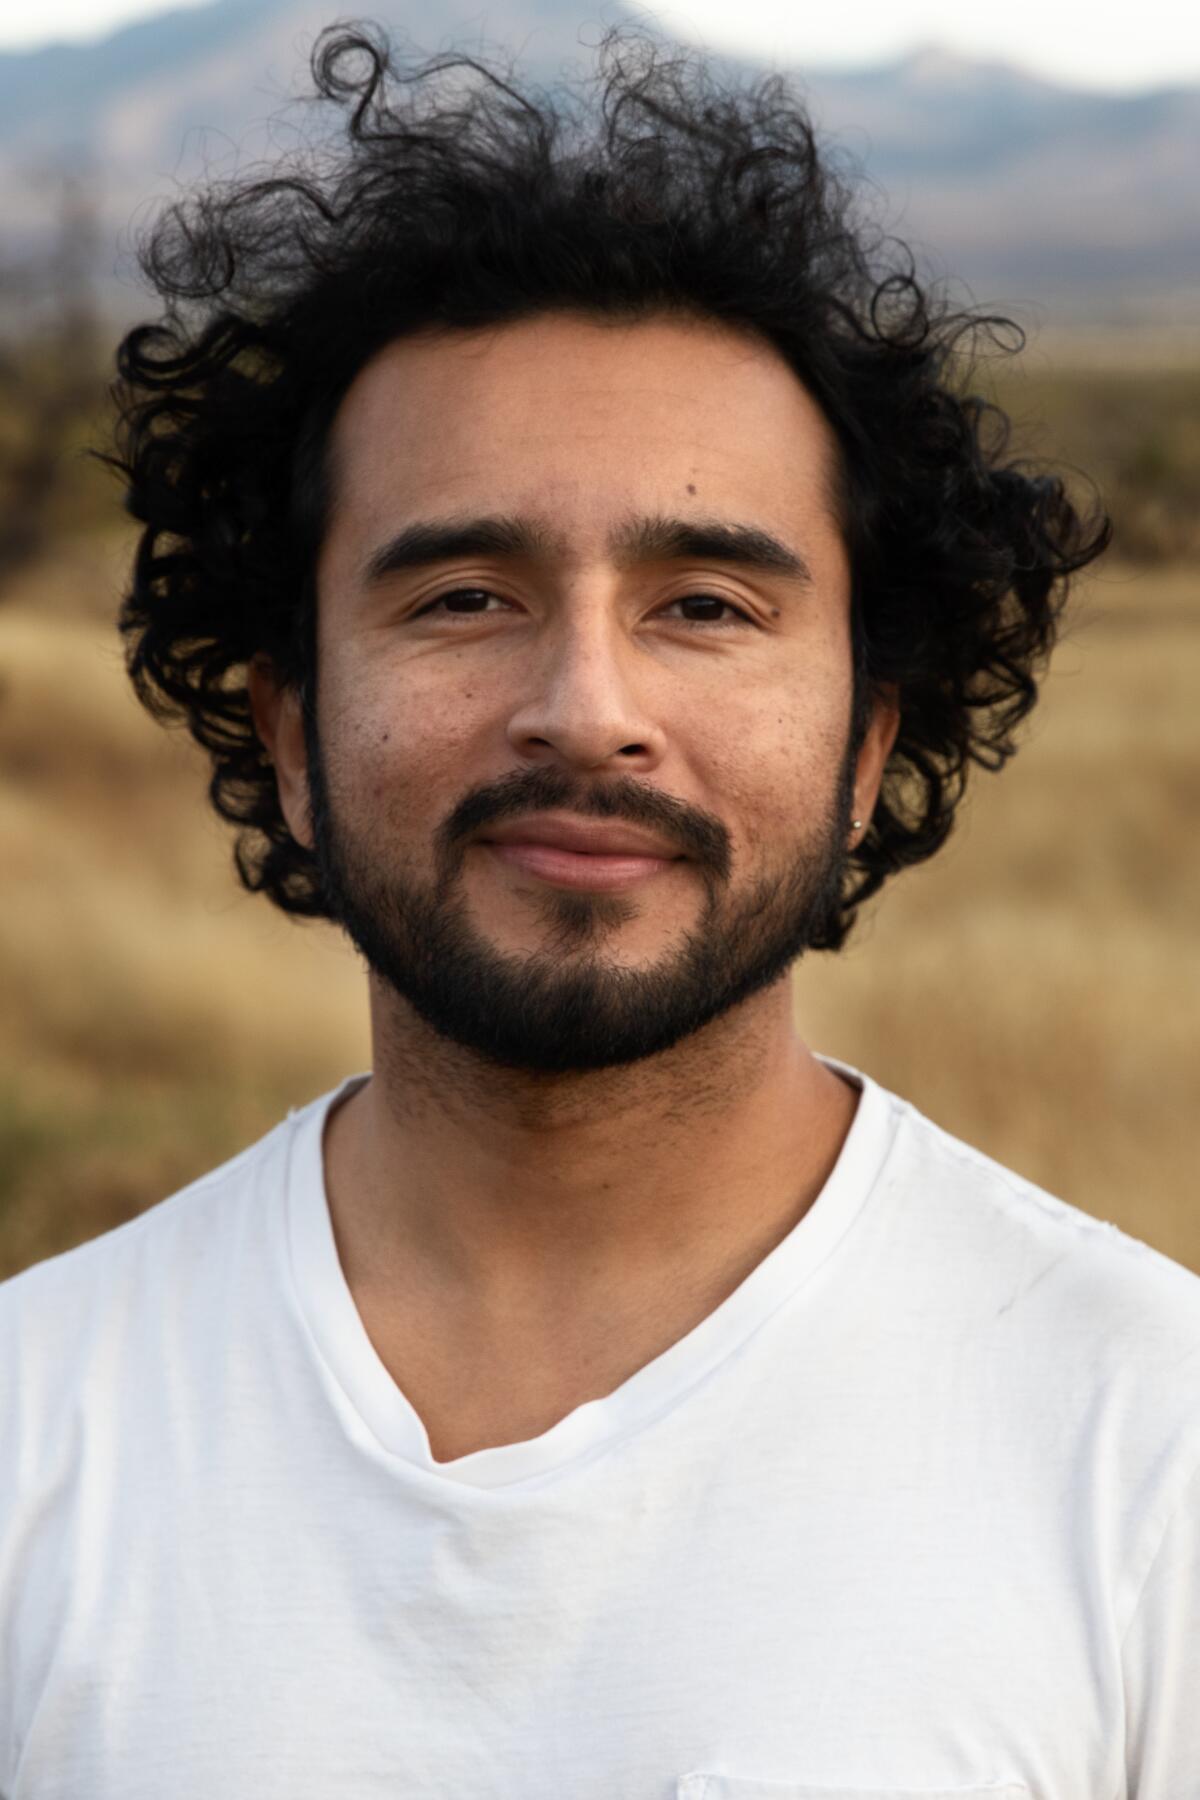 A man with dark, curly hair and a beard, wearing a white T-shirt.